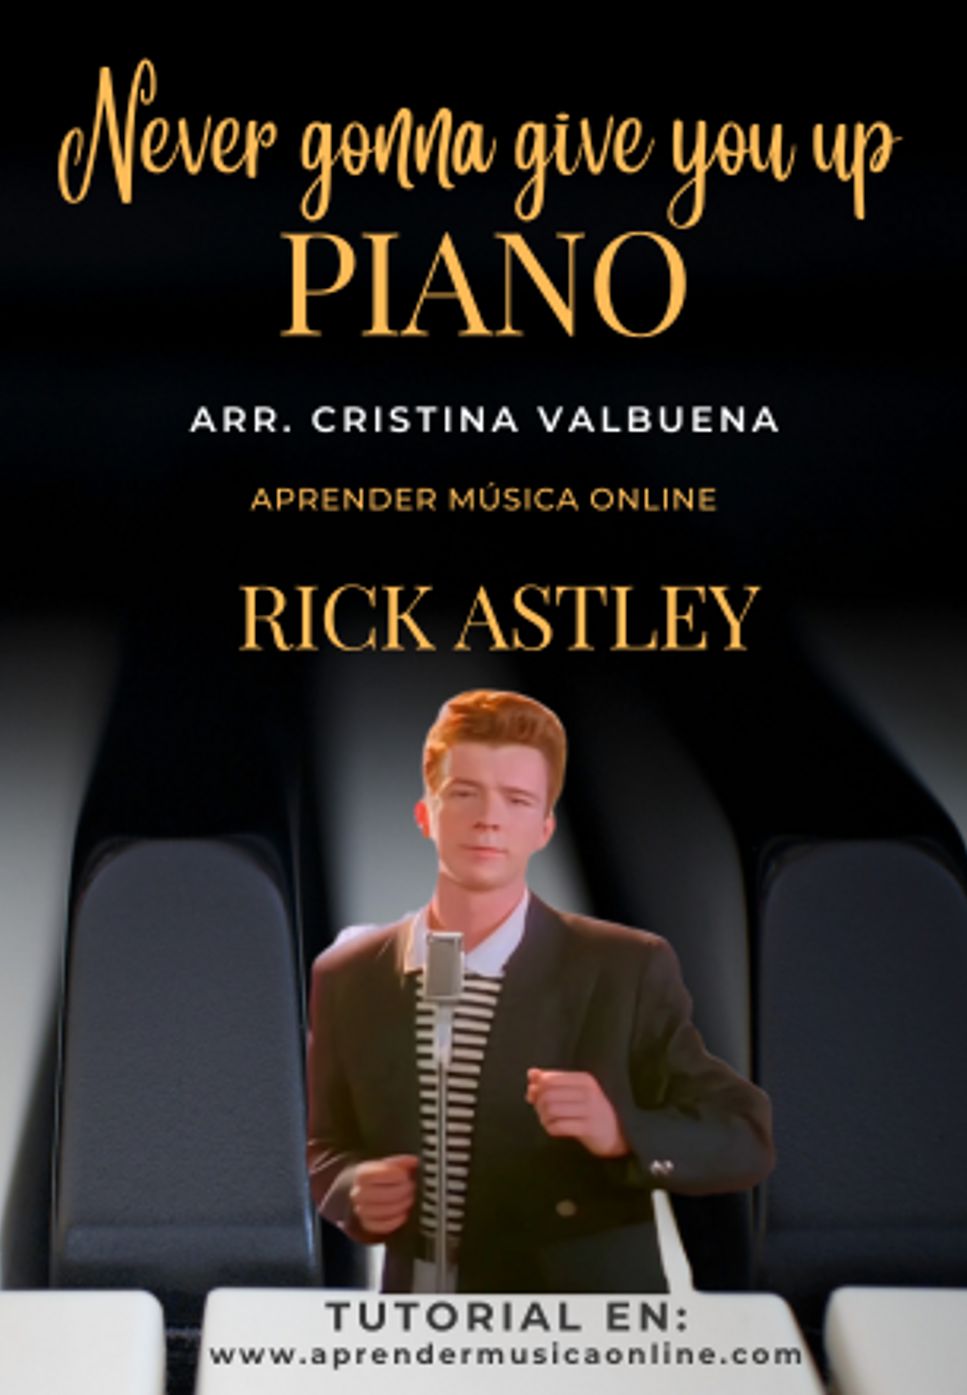 Rick Astley - Never gonna give you up by Cristina Valbuena